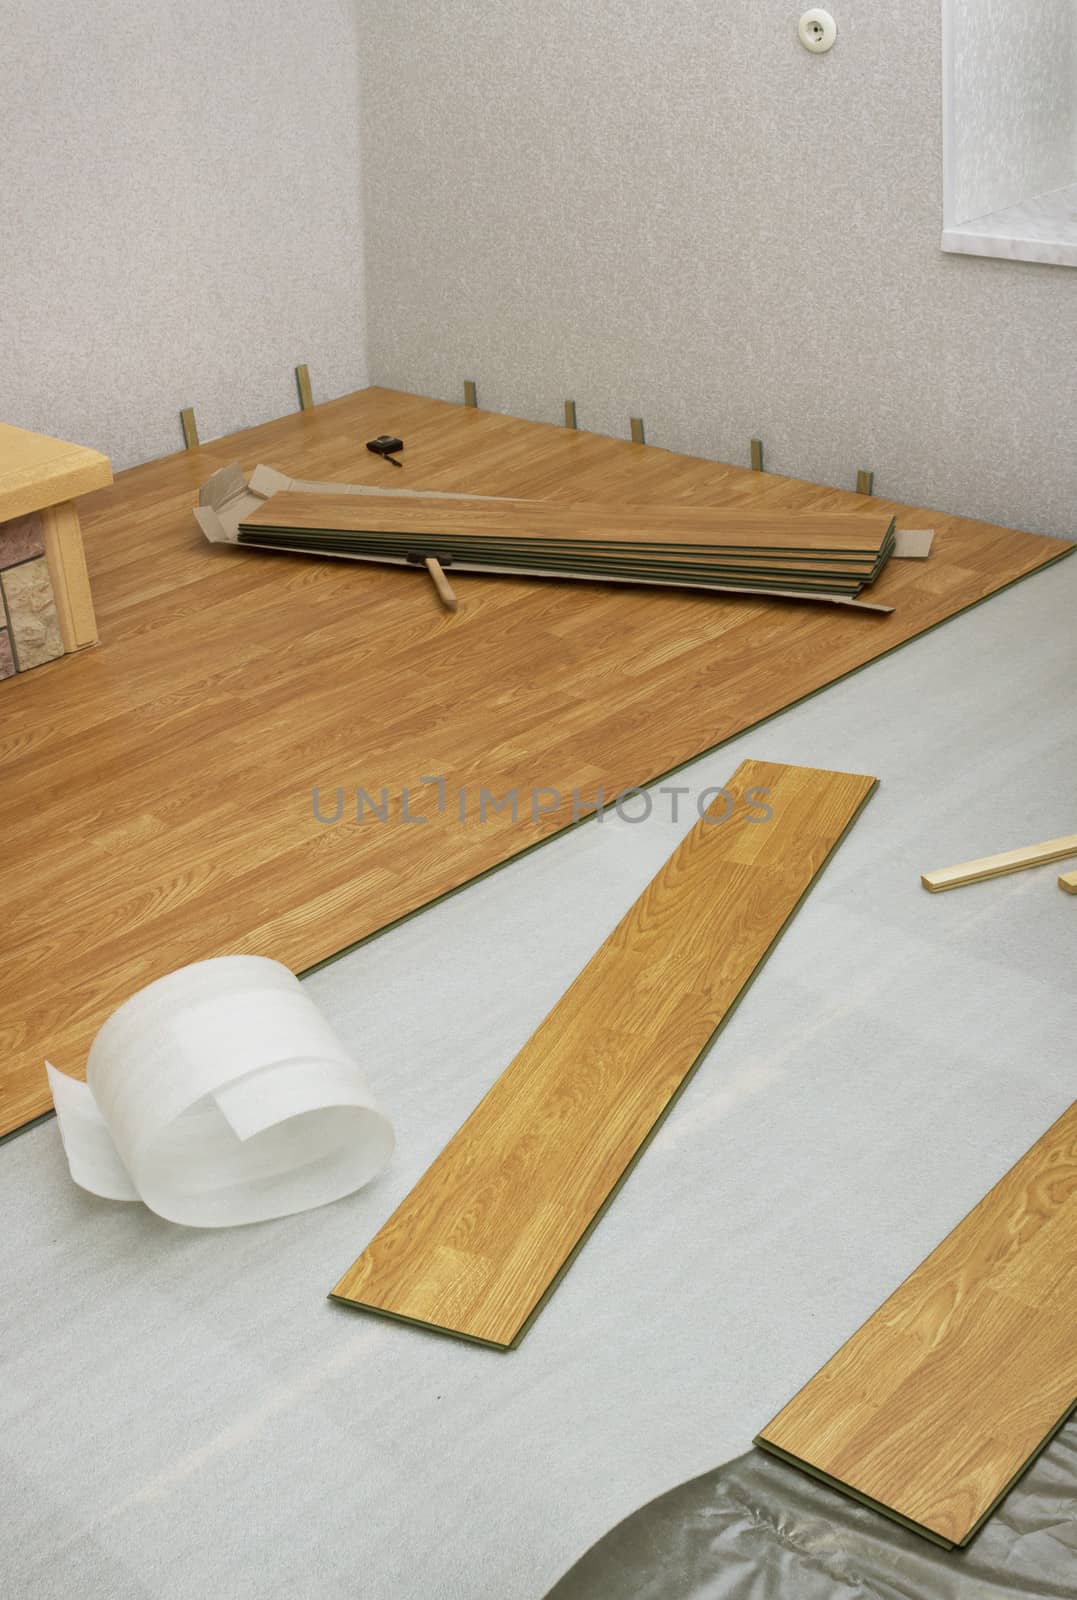 Laying indoors laminated panels the color of the wood